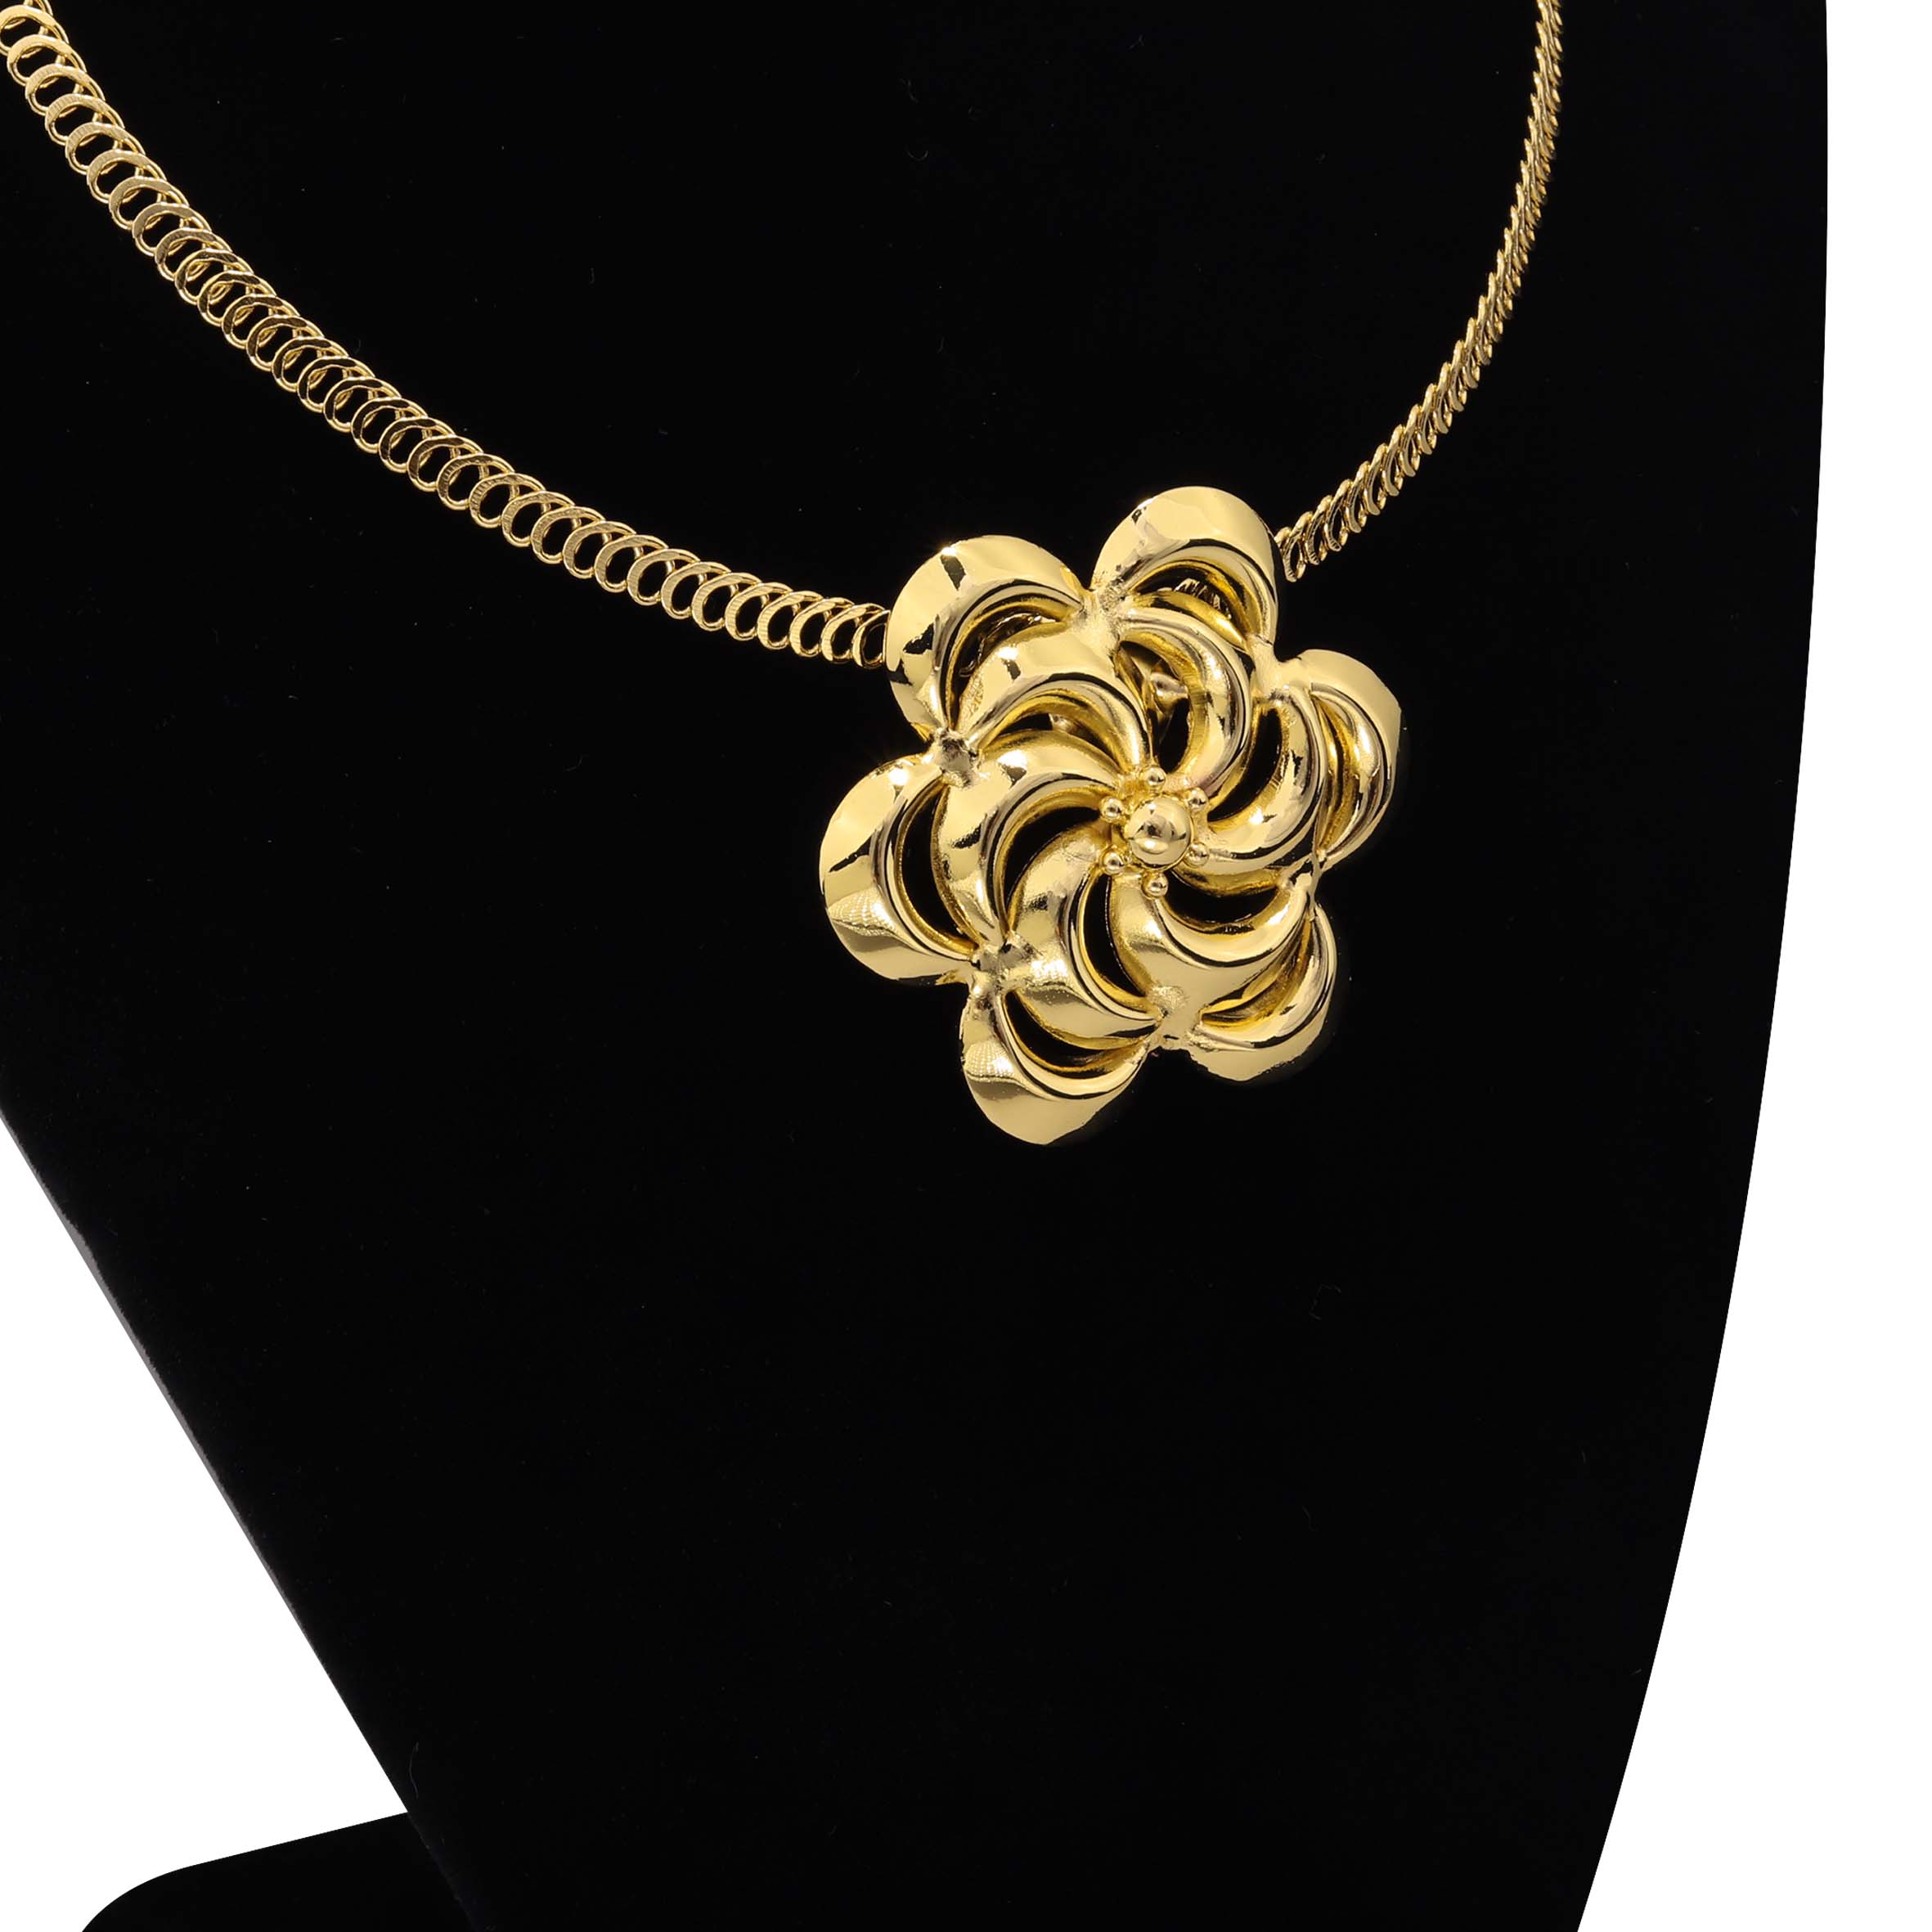 Luxurious 24k Gold Plated Big Flower Necklace Earrings Jewelry Set